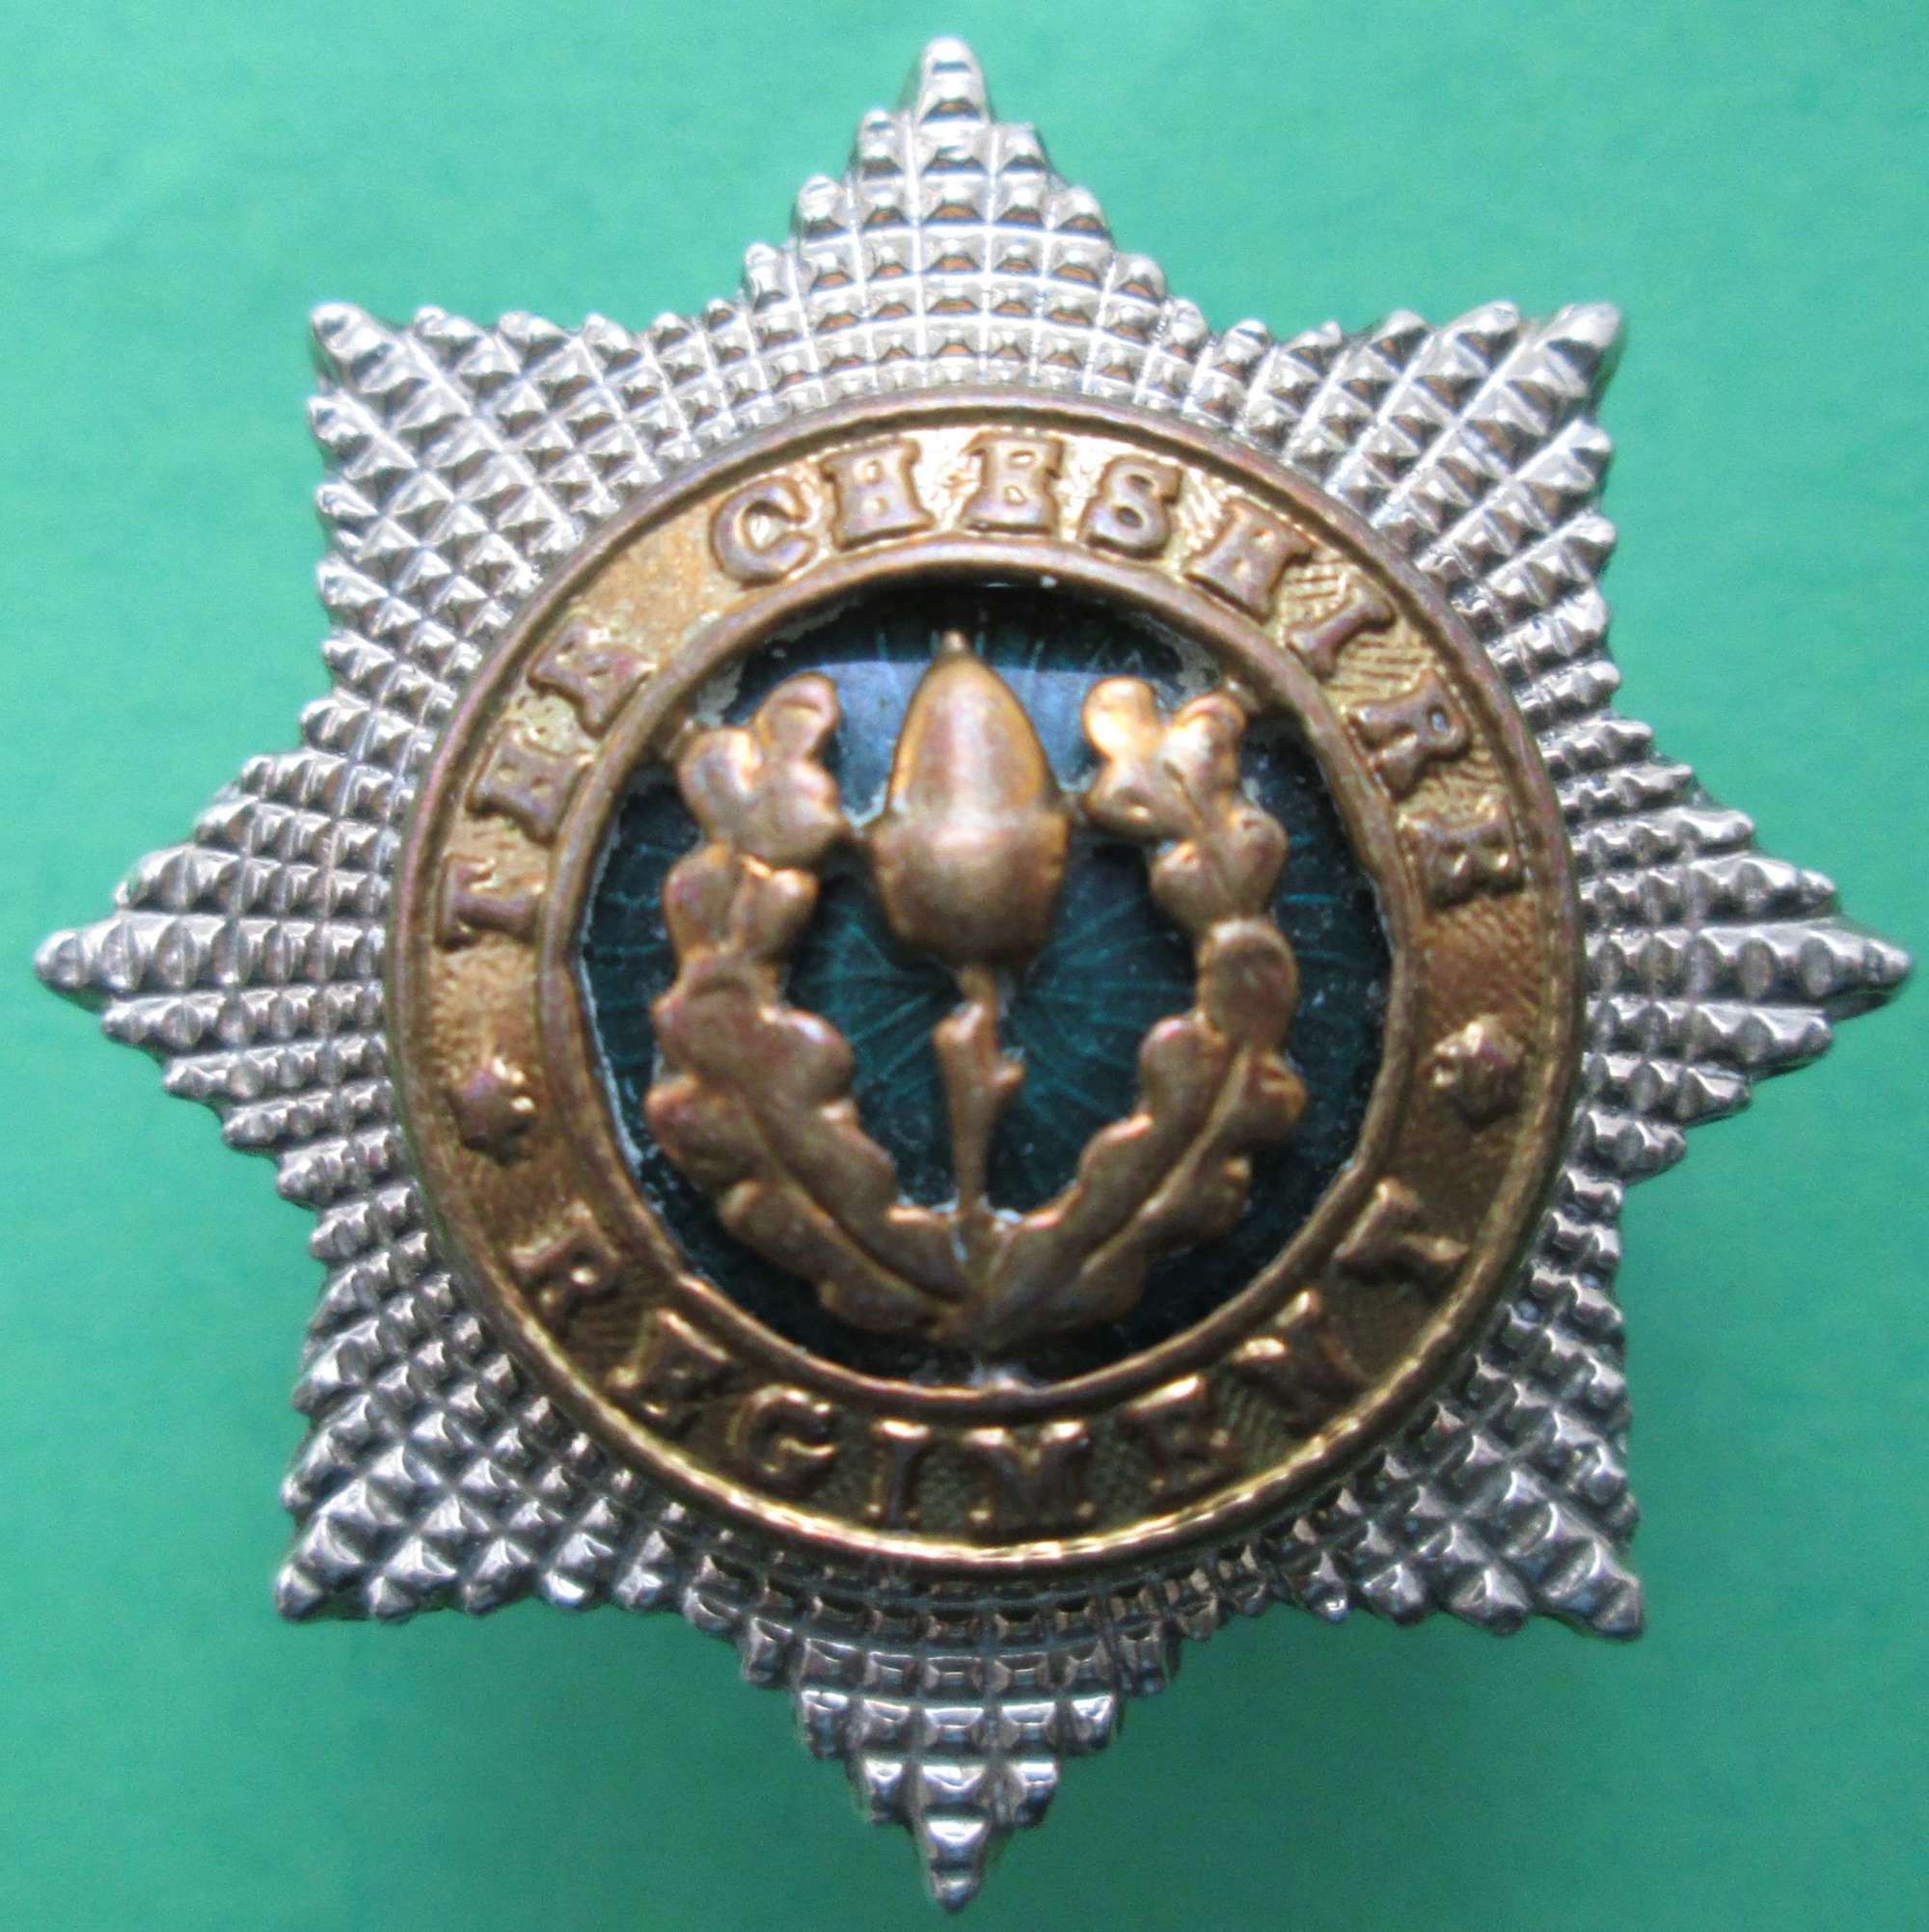 SILVER PLATED OFFICER'S CHESHIRE REGIMENT COLLAR